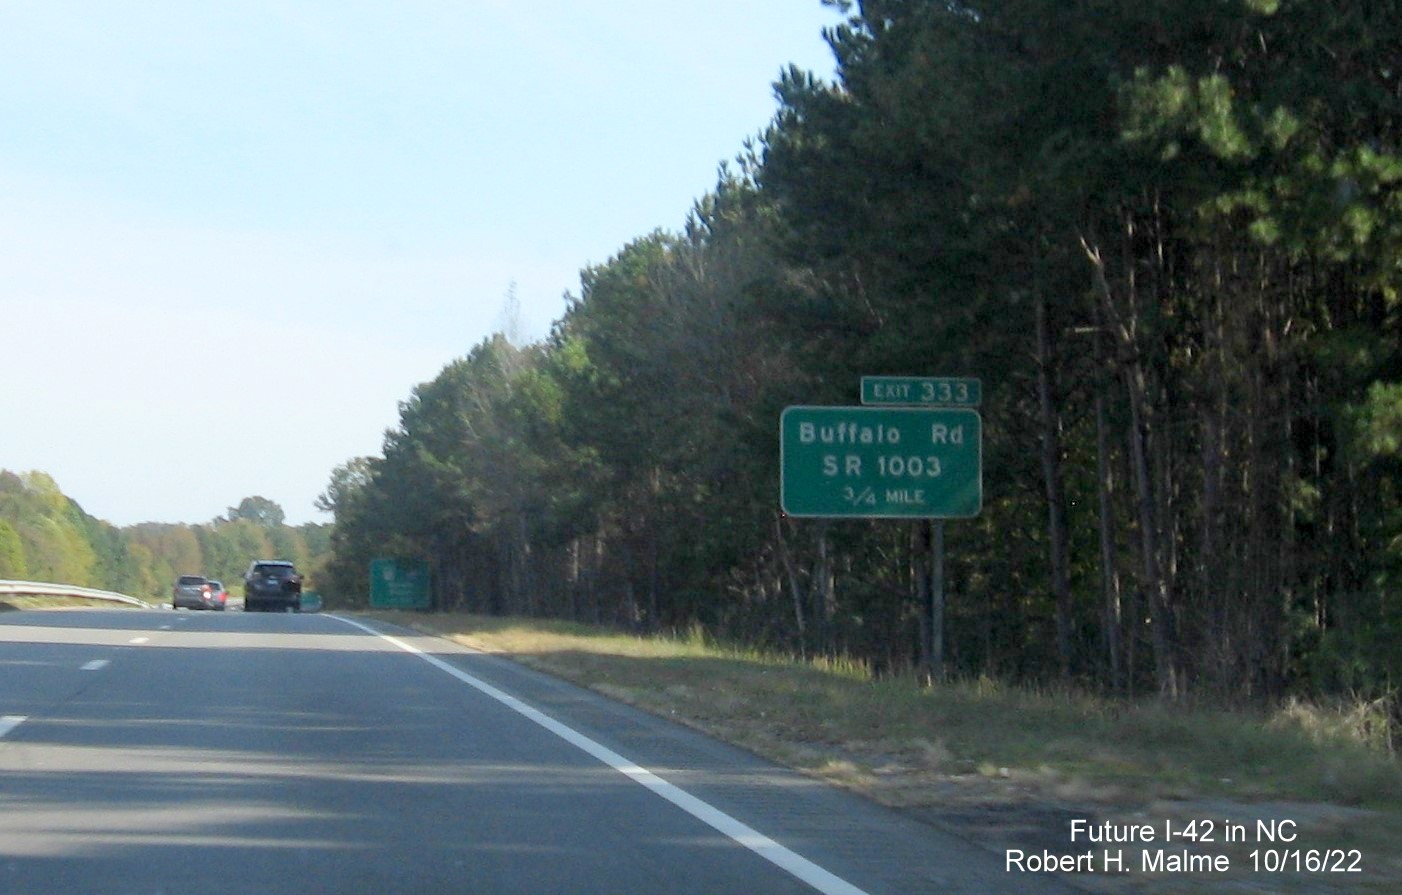 Image of ground mounted 3/4 mile advance sign for Buffalo Road exit on US 70 (Future I-42) East in Smithfield, October 2022